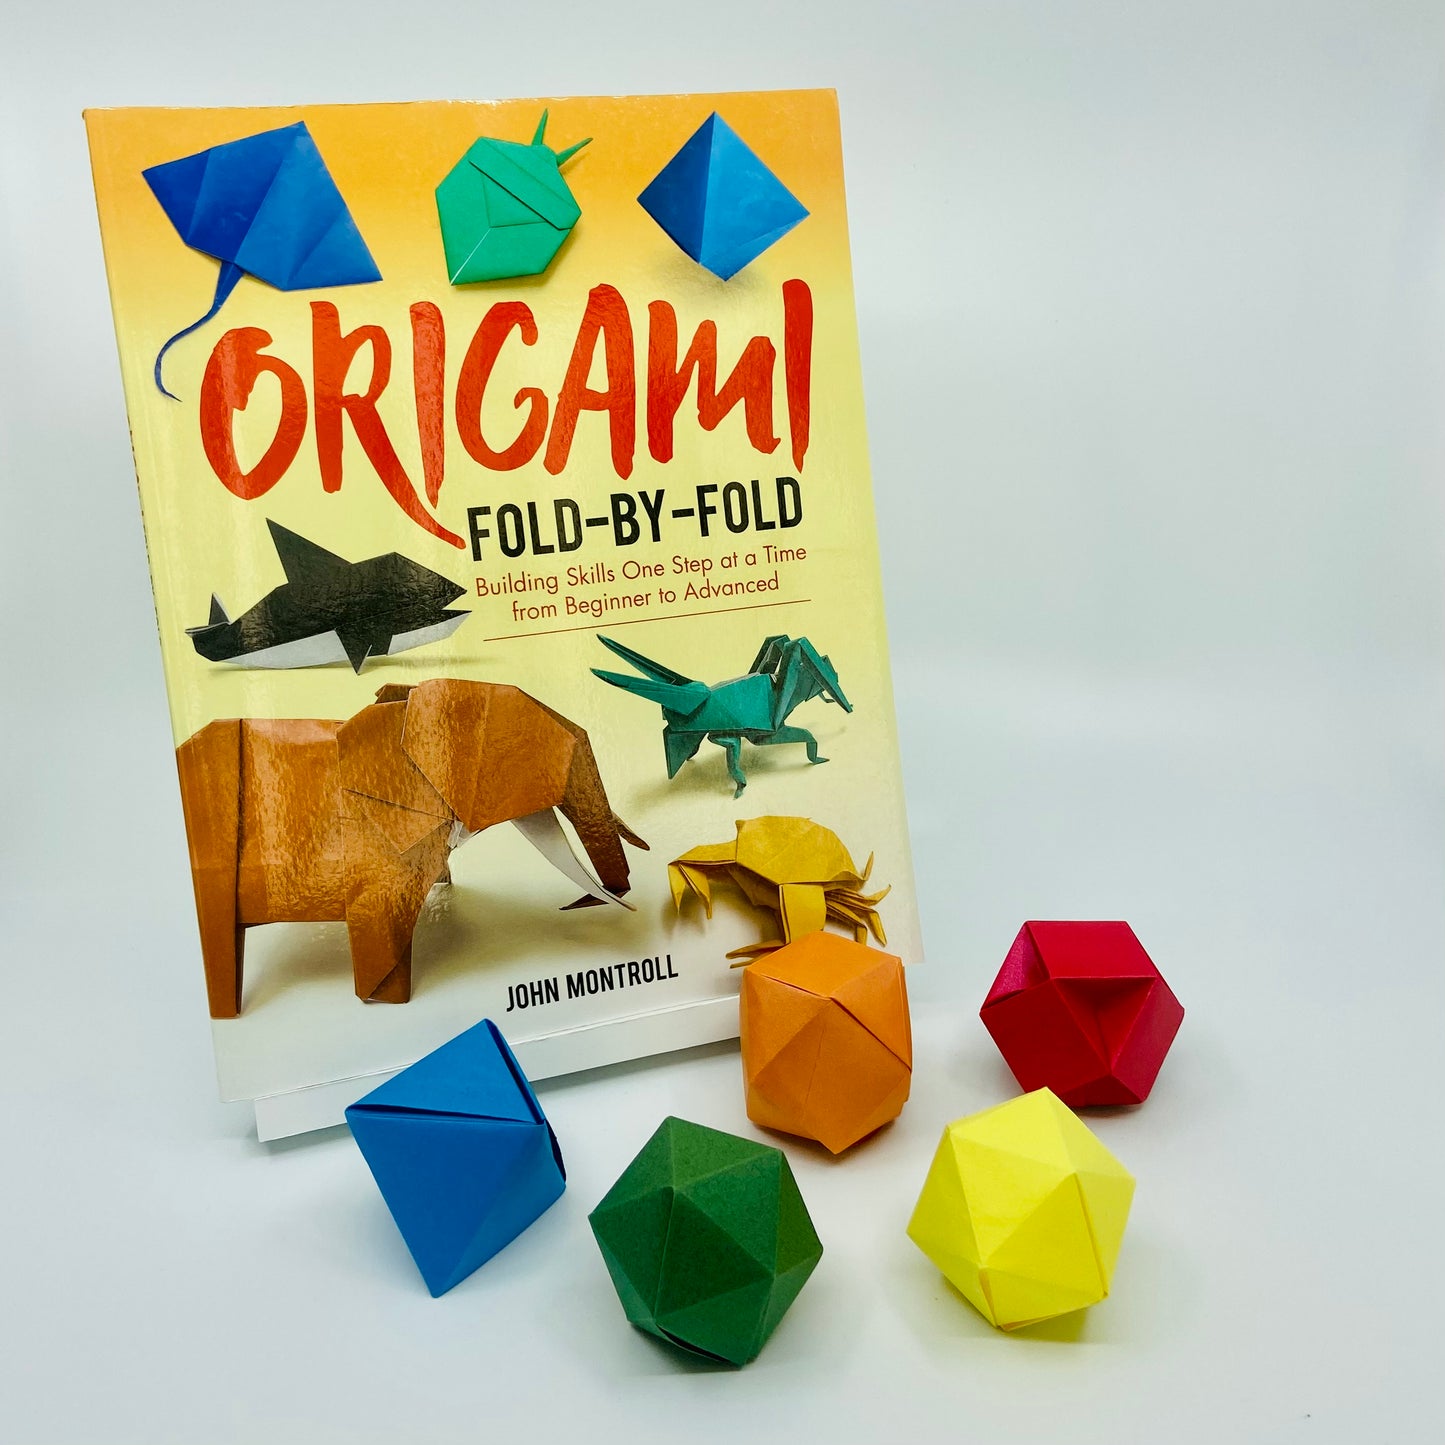 Origami Fold-by-Fold: Building Skills One Step at a Time from Beginner to Advanced